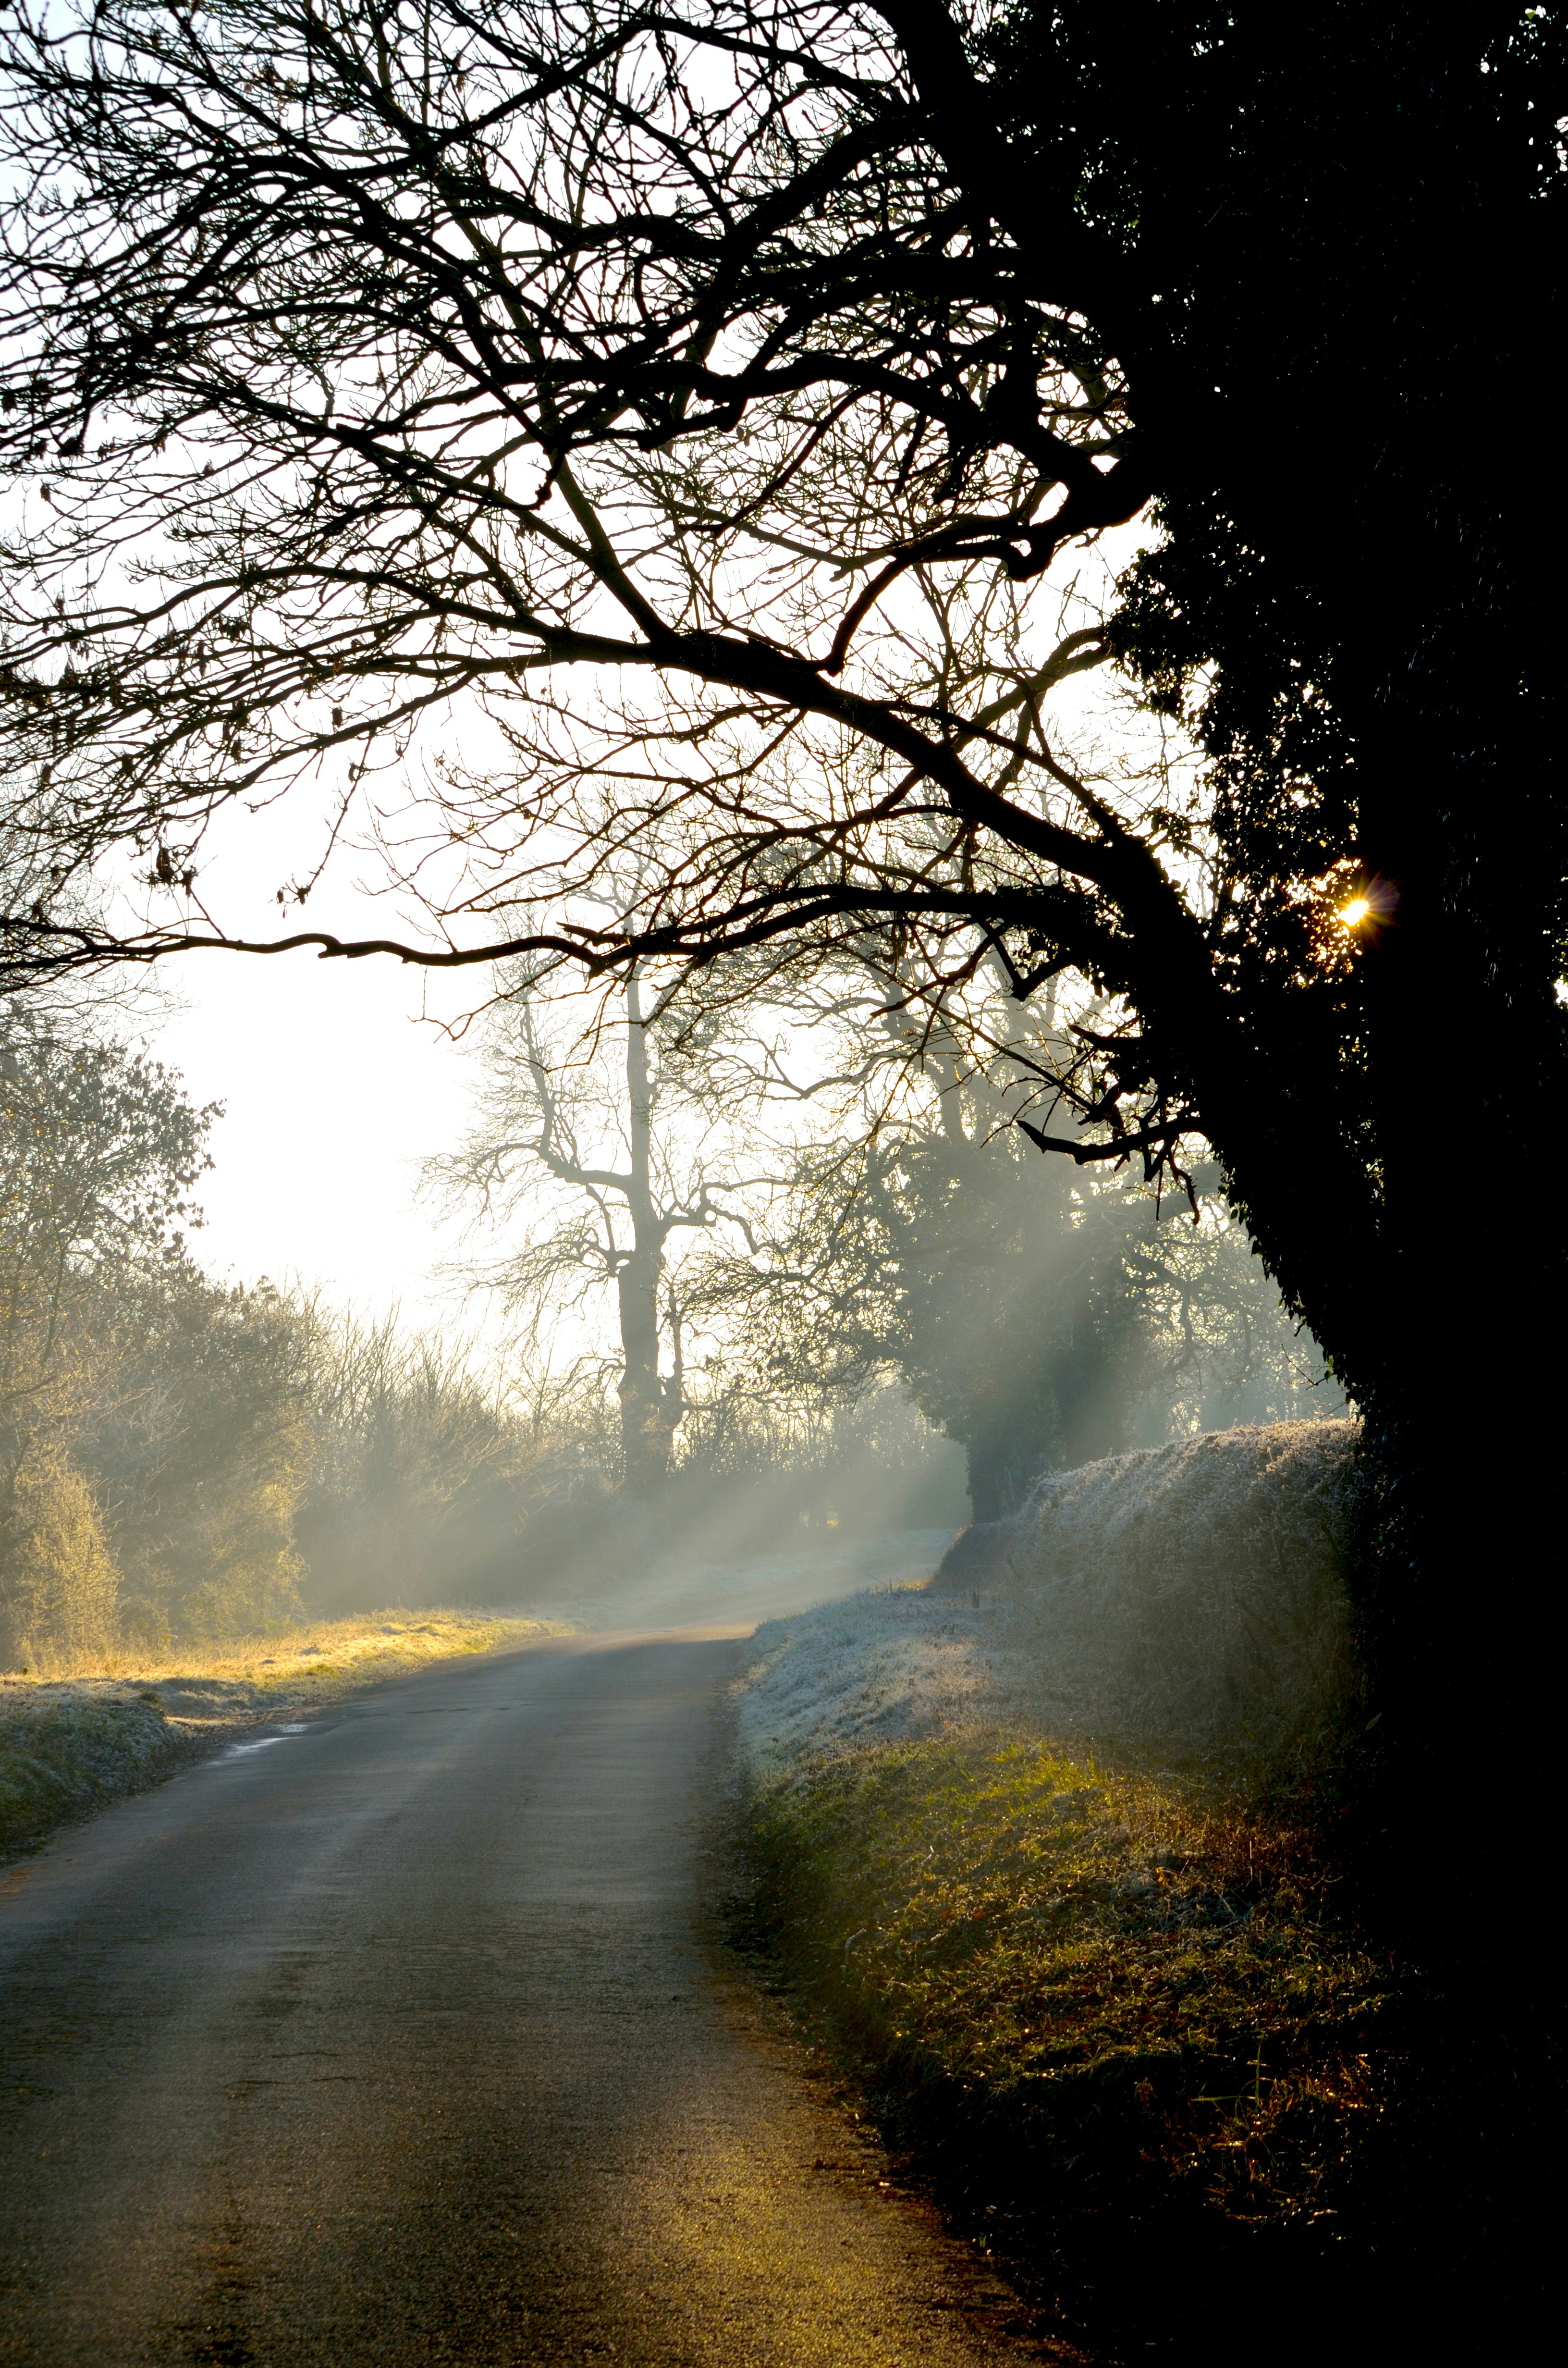 As the frozen fog lifted one morning the sunlight gave us some charming views in Northamptonshire.